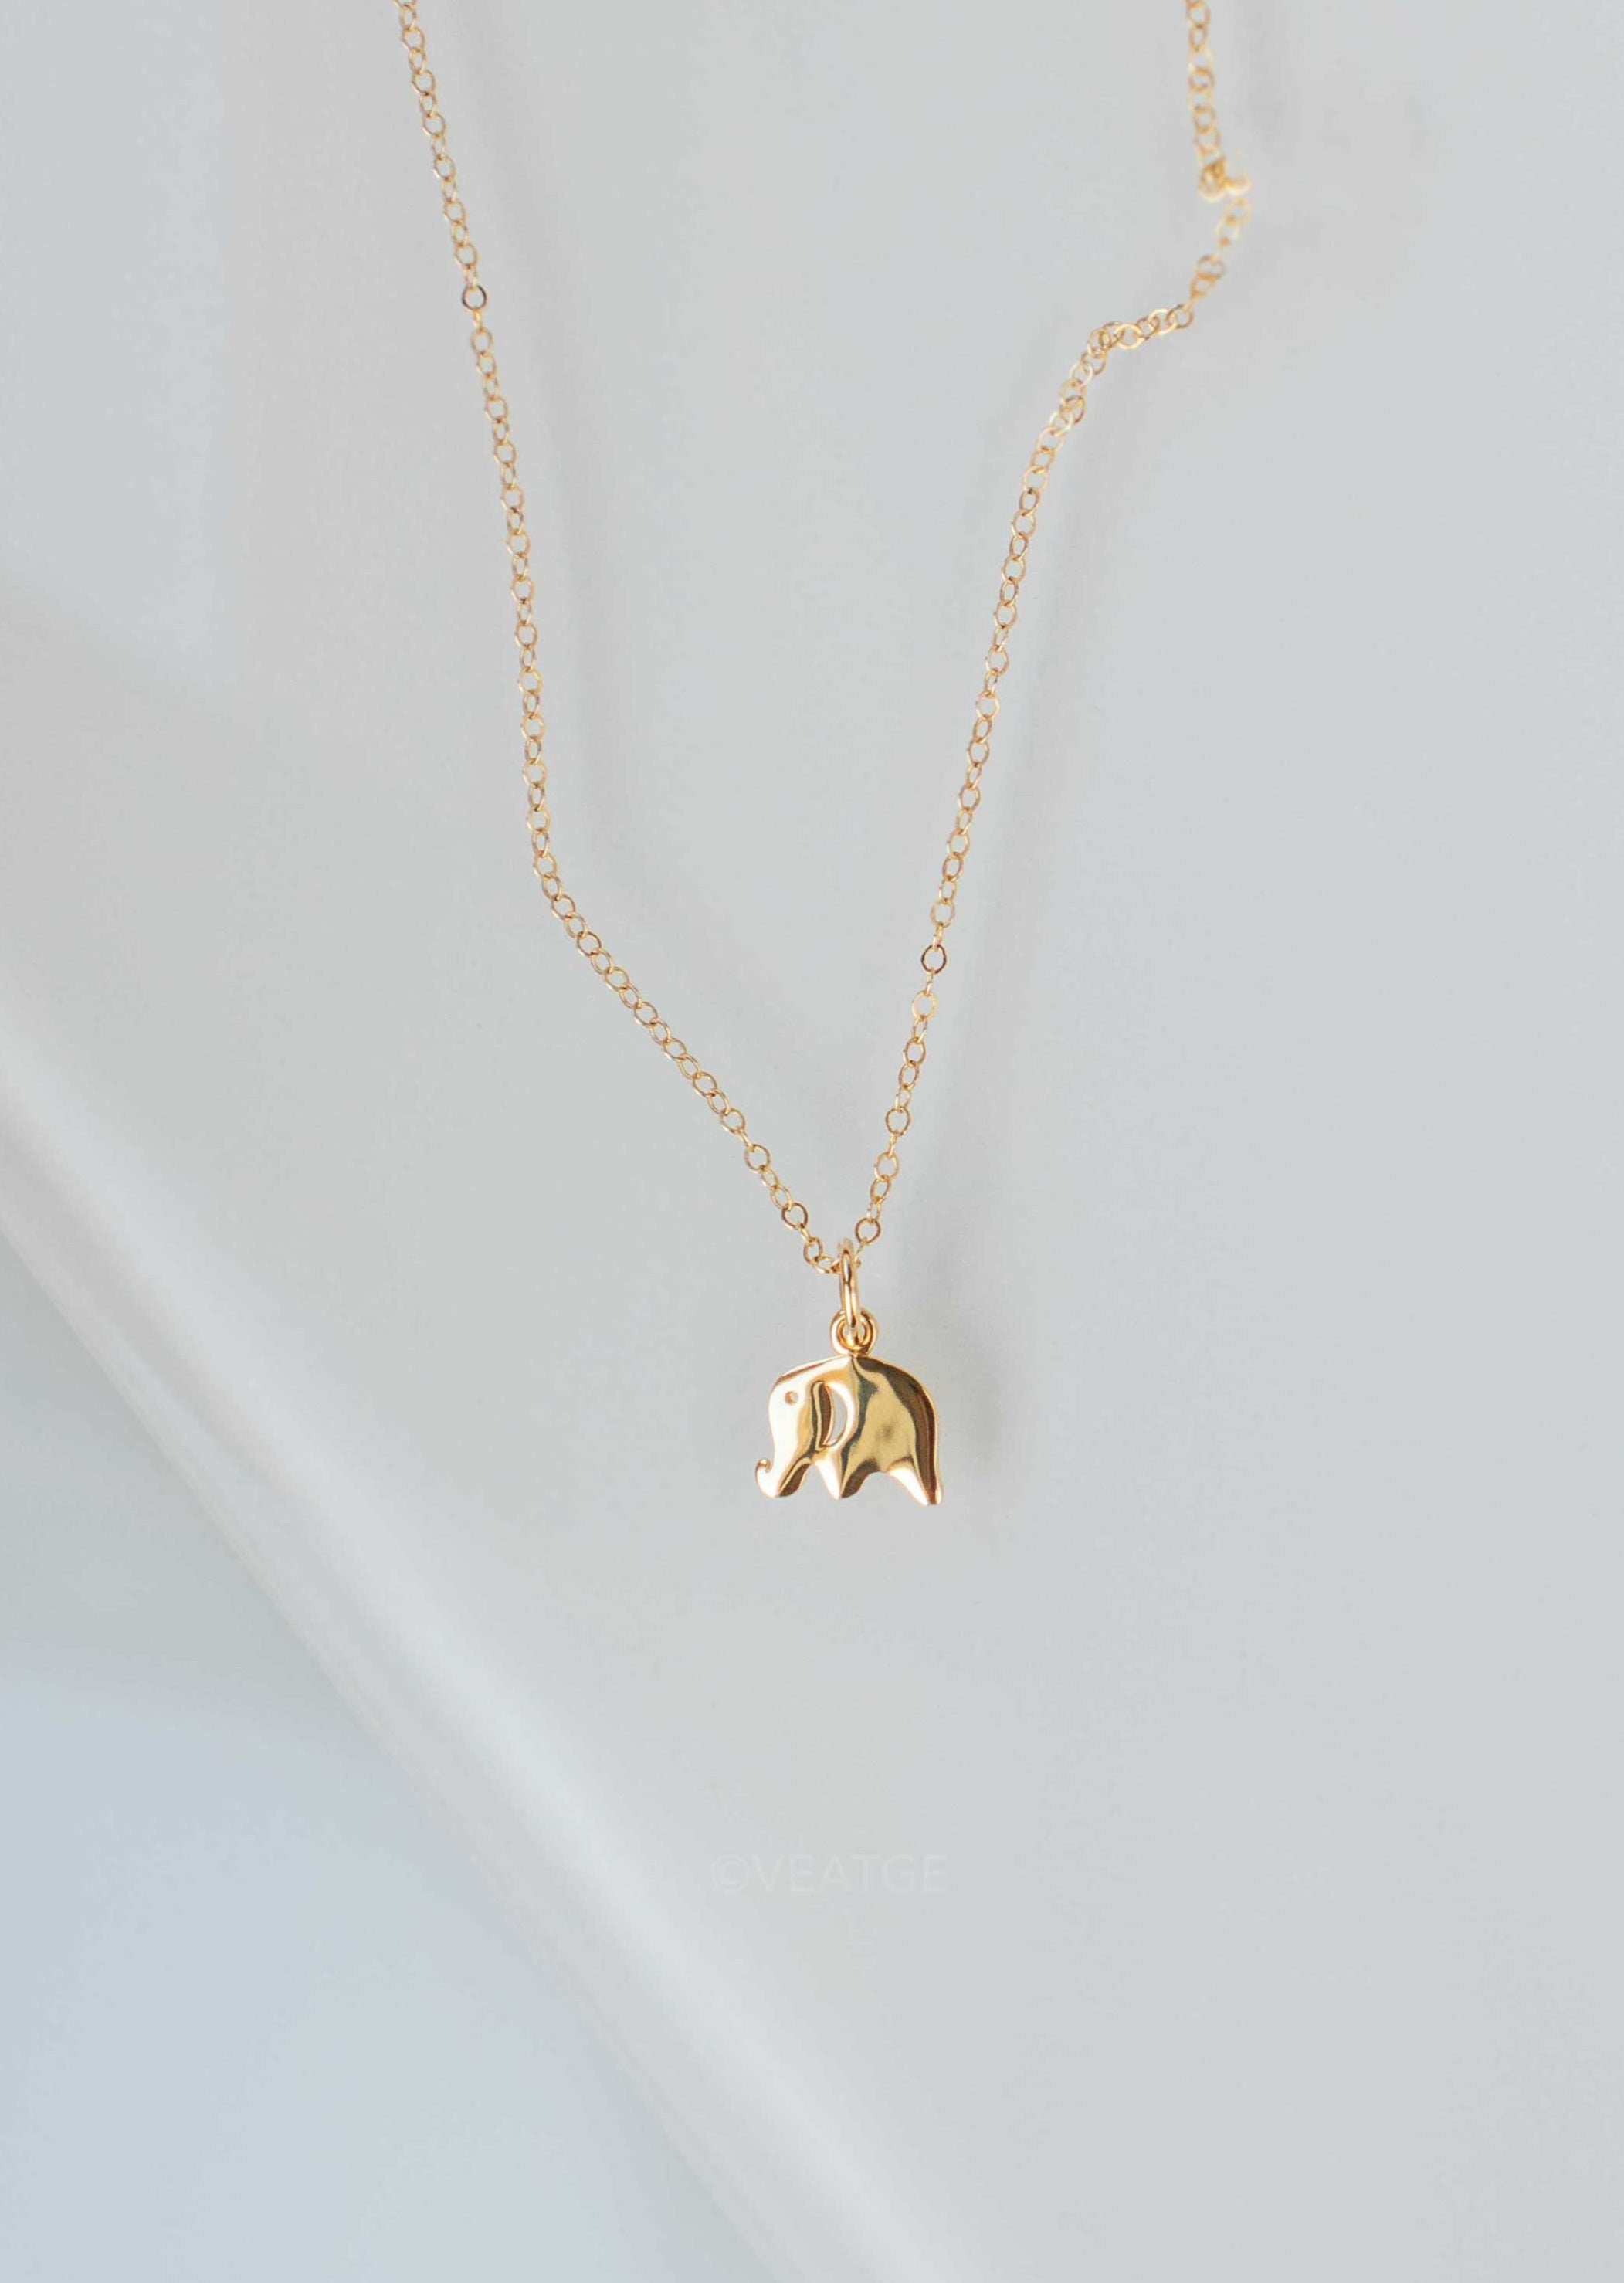 Elephant Charm Pendant Gold Dainty Necklace Cute gifts for girlfriend bff Christmas graduation